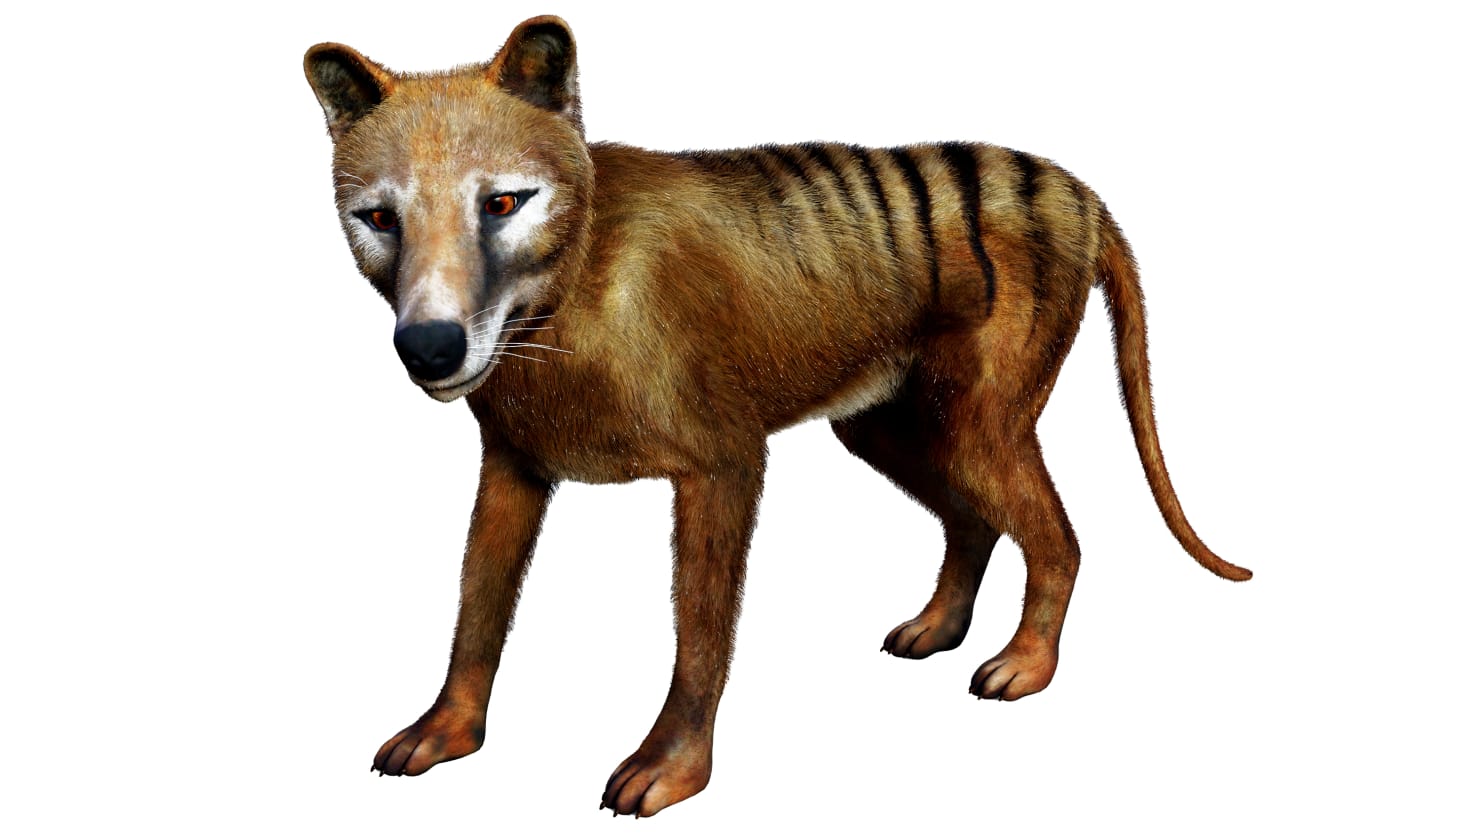 The lost remains of the last known Tasmanian tiger have been found